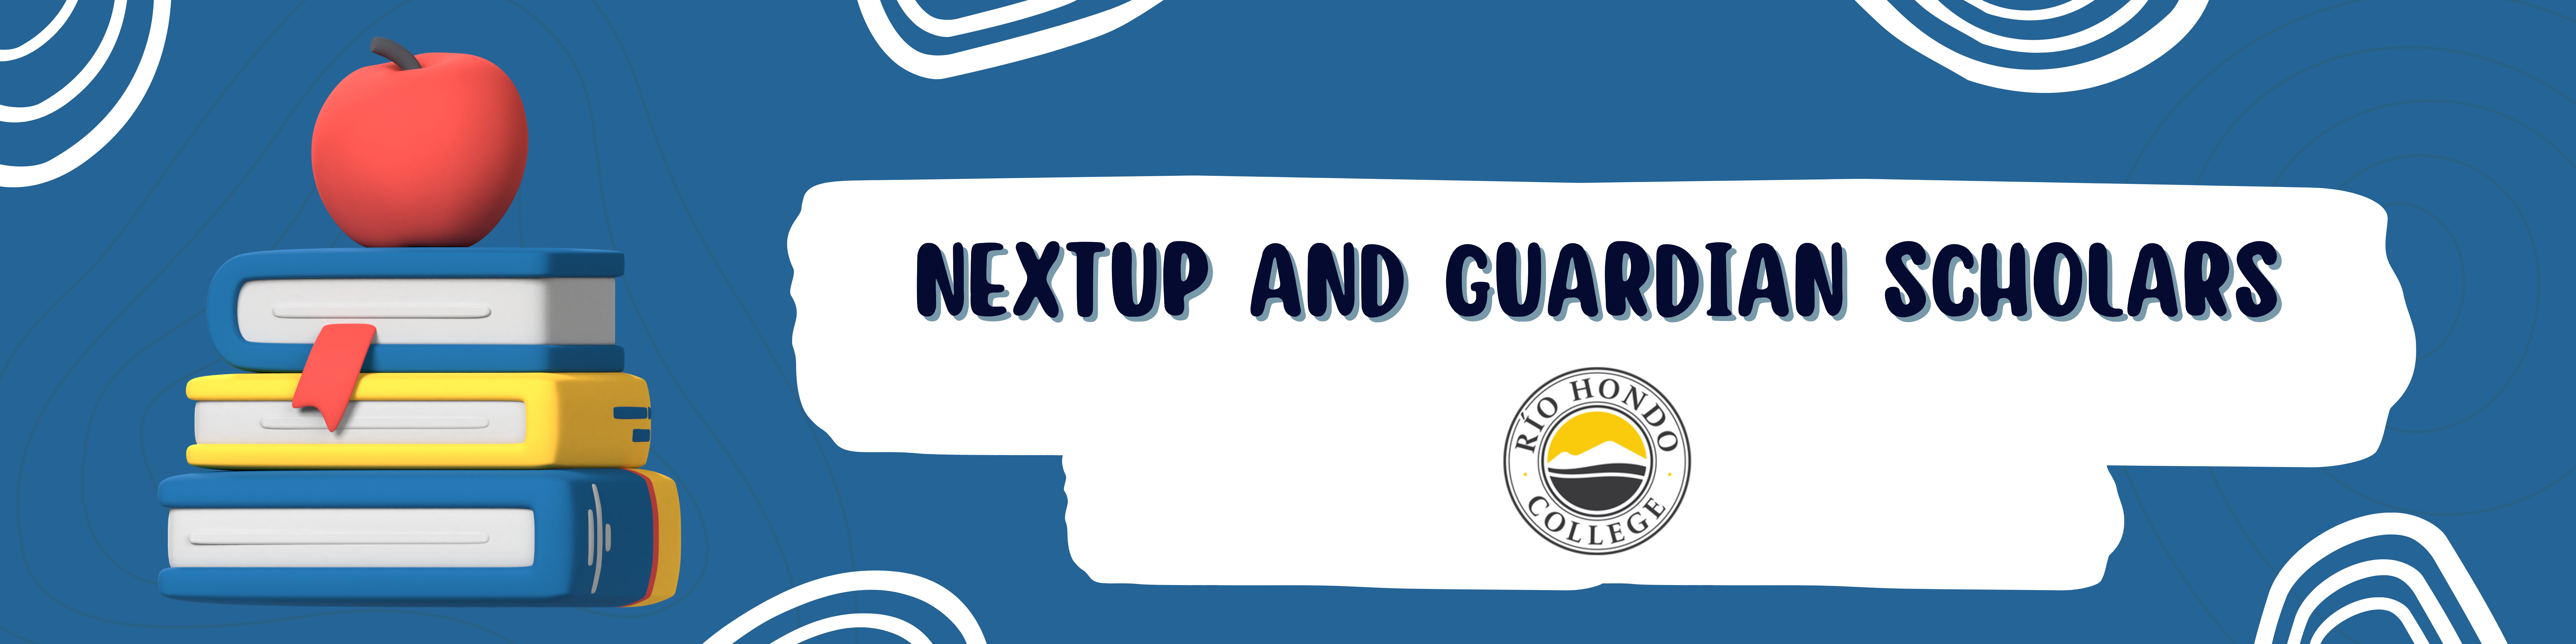 NextUp and Guardian Scholars banner